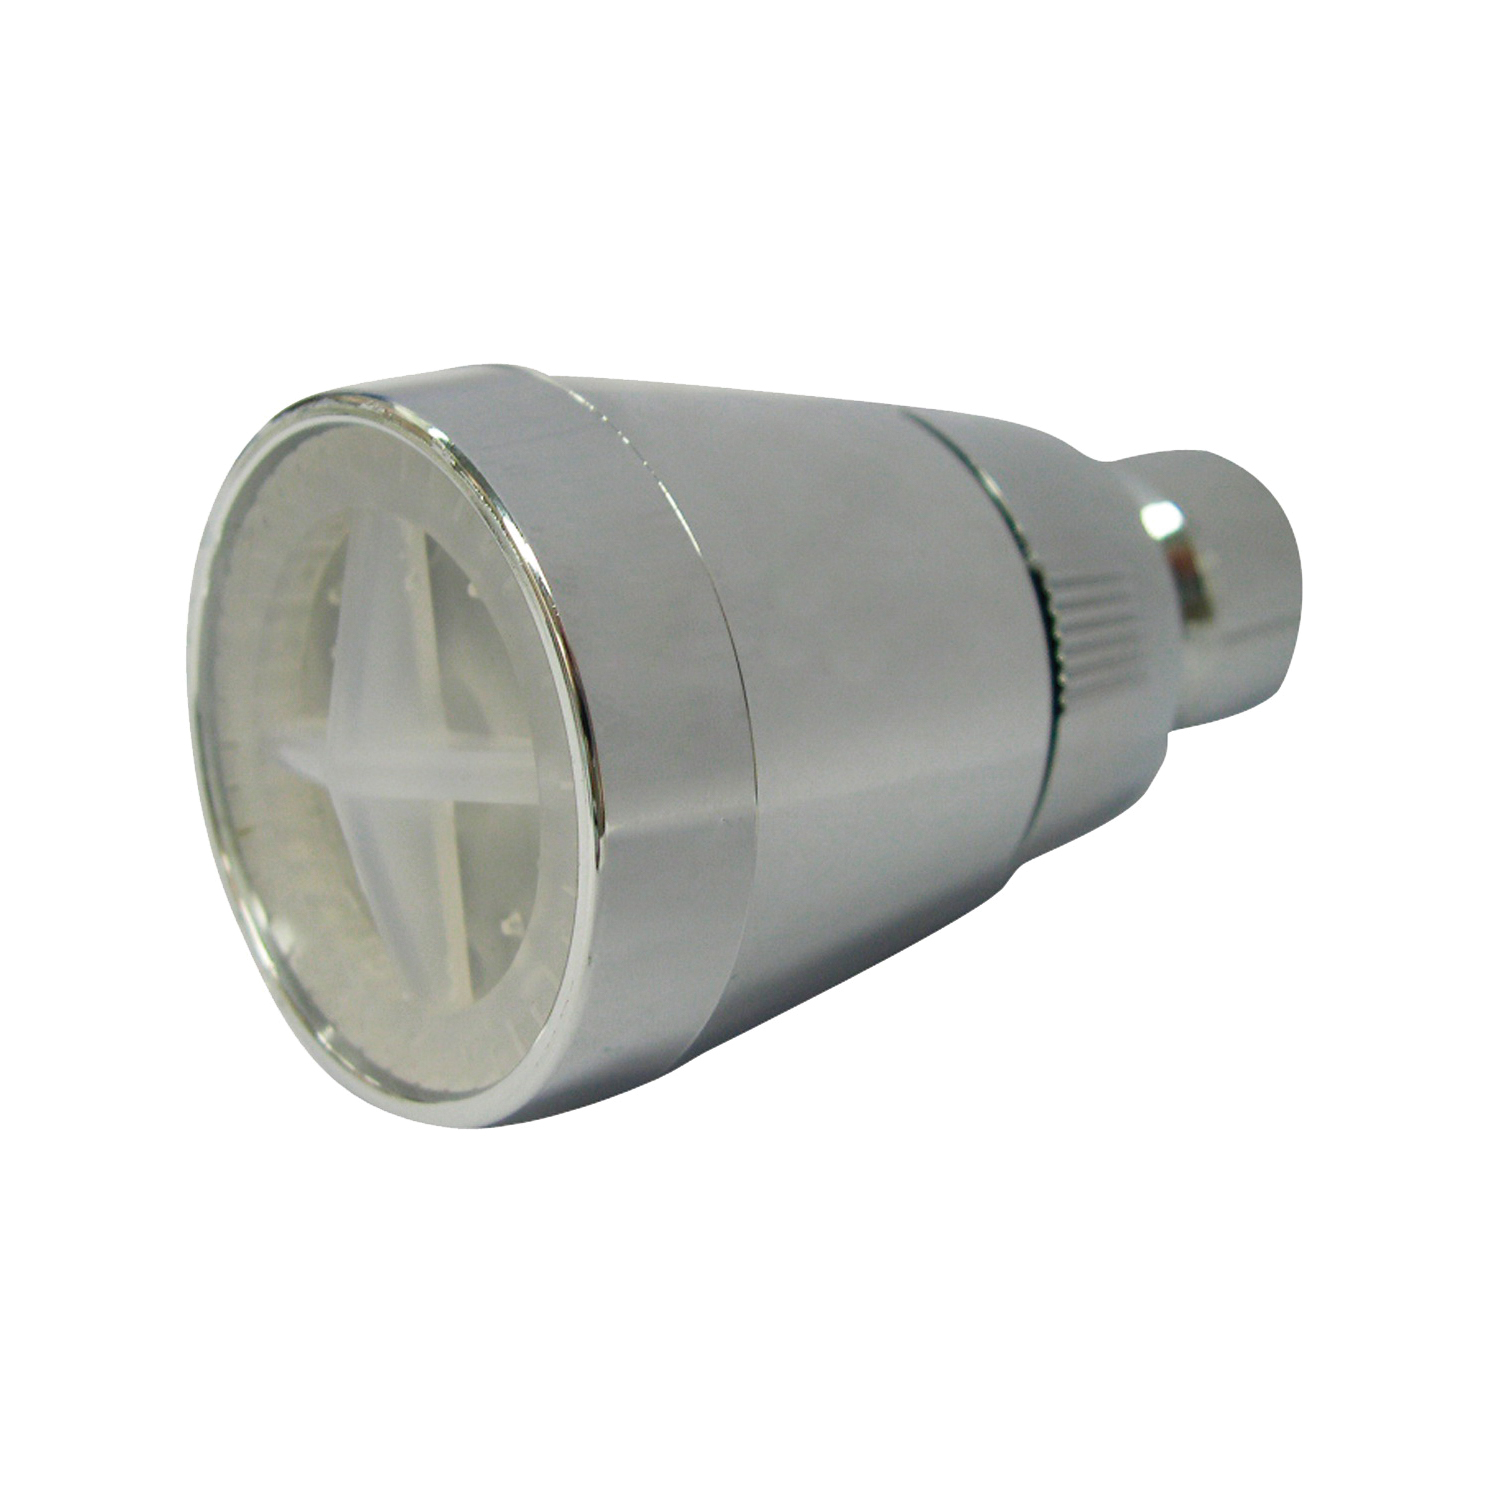 PP6881320 Shower Head, Round, 1.8 gpm, 1/2-14 NSPM Connection, Threaded, ABS, 1-3/4 in Dia